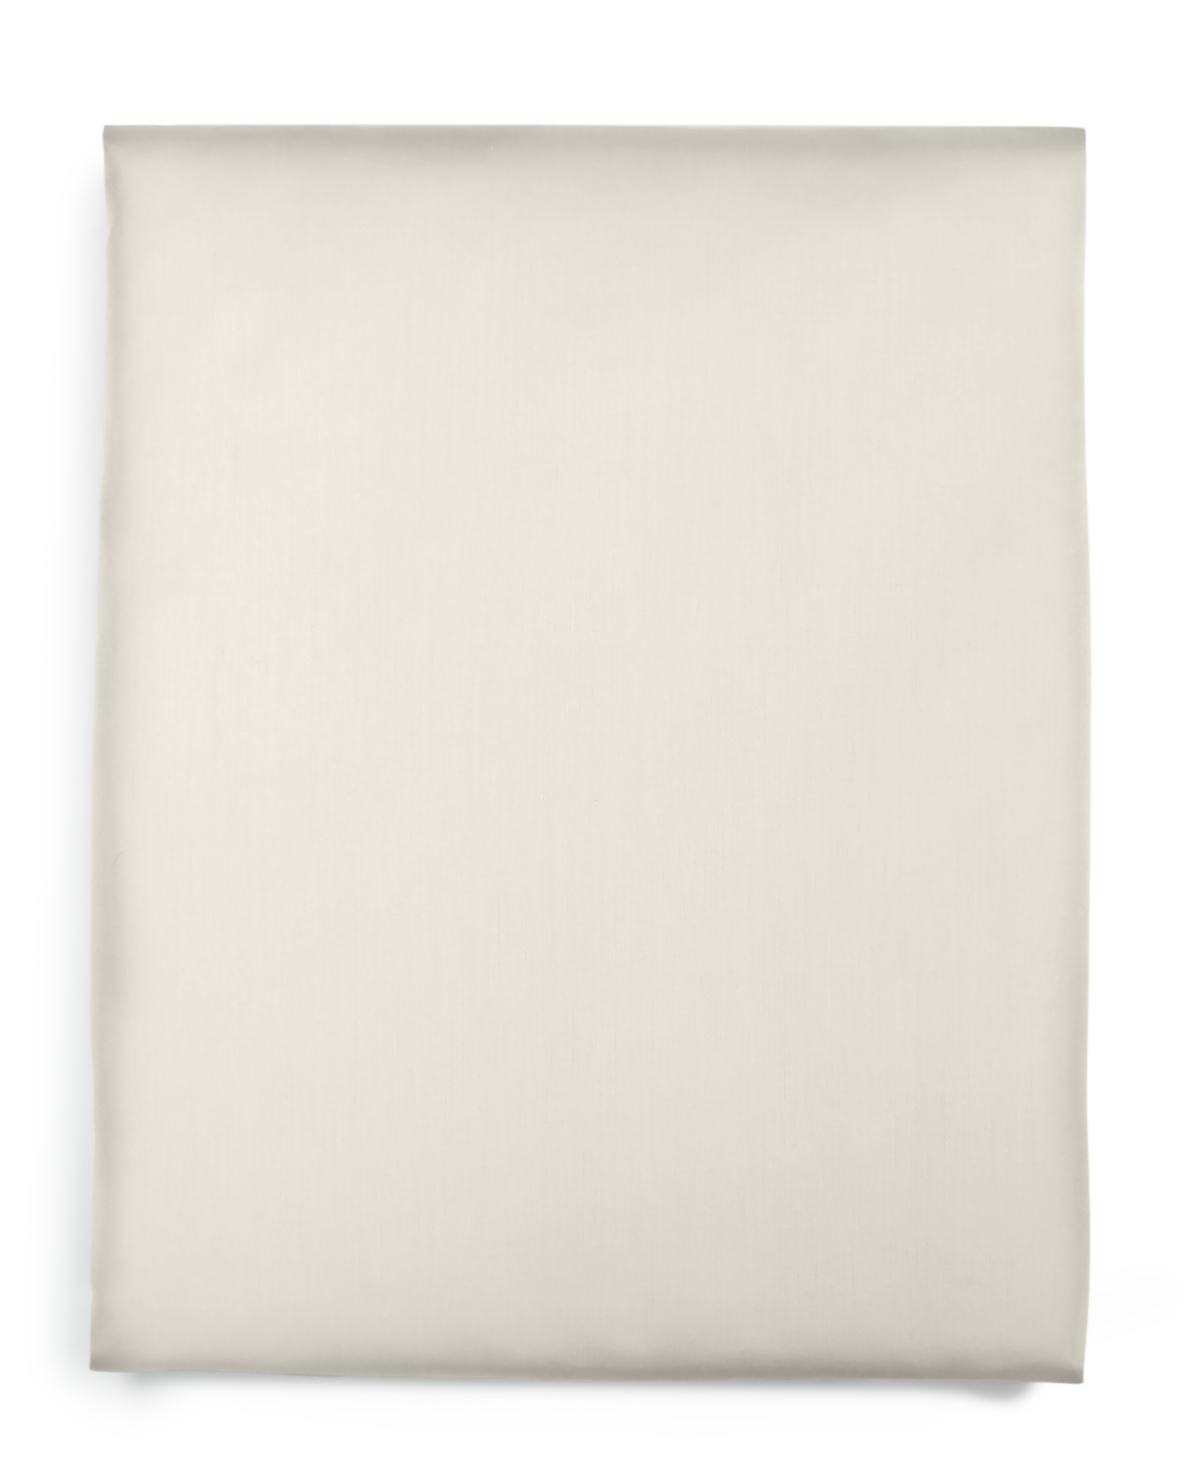 CHARTER CLUB DAMASK SOLID 550 THREAD COUNT 100% COTTON 18" FITTED SHEET, QUEEN, CREATED FOR MACY'S